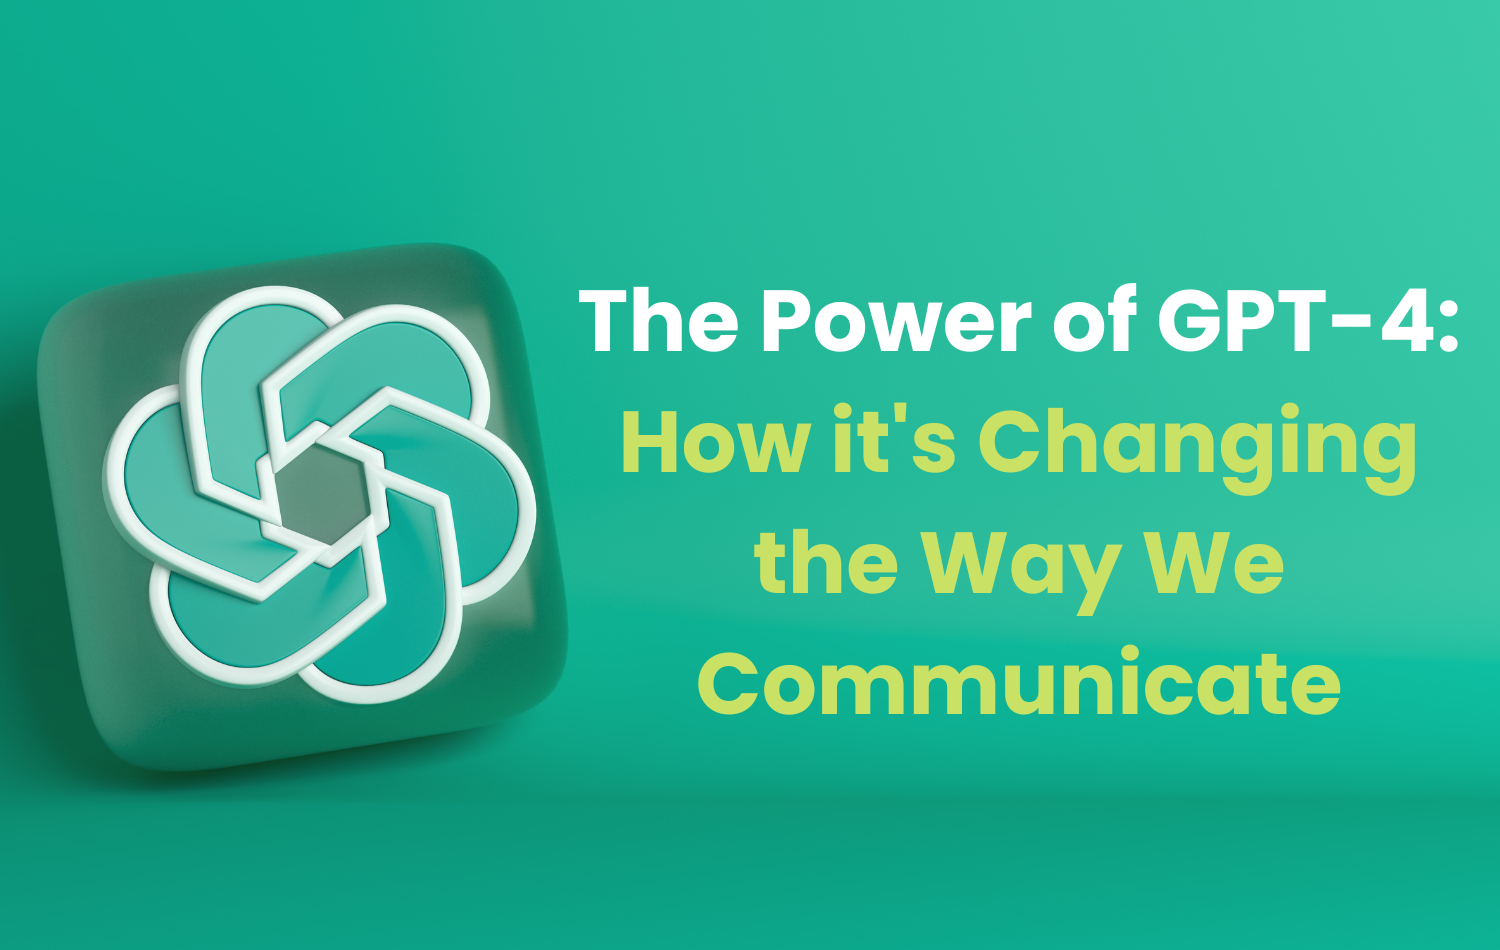 The Power of GPT-4 How it's Changing the Way We Communicate - SID Global Solutions